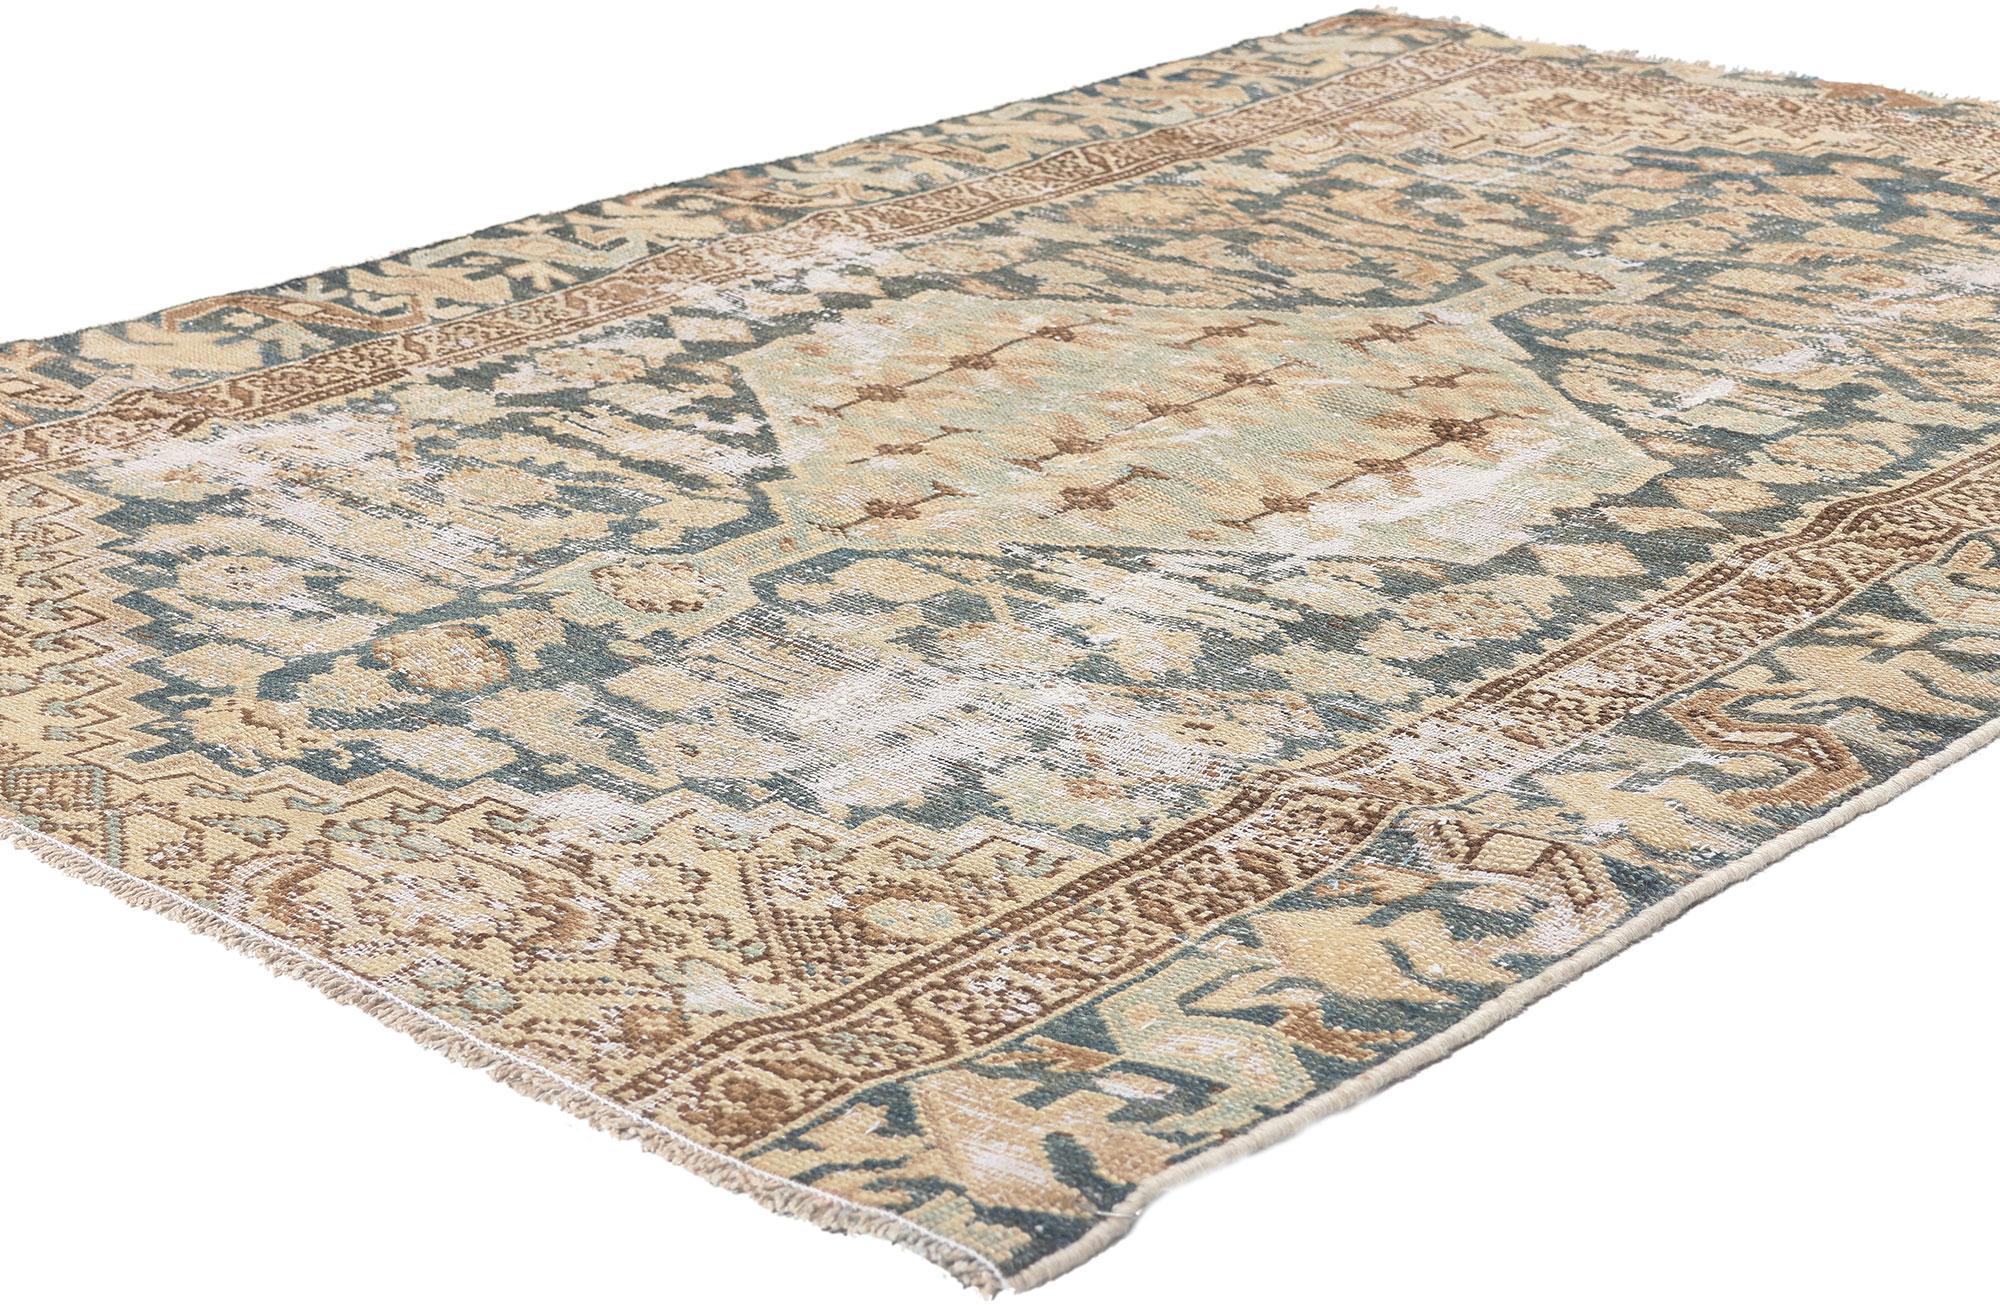 61264 Distressed Antique Persian Malayer Rug, 03'09 x 05'06. Step into the allure of tradition with this Malayer rug, a testament to the rustic charm of Persian craftsmanship originating from Malayer, Iran. Renowned for their enduring quality and